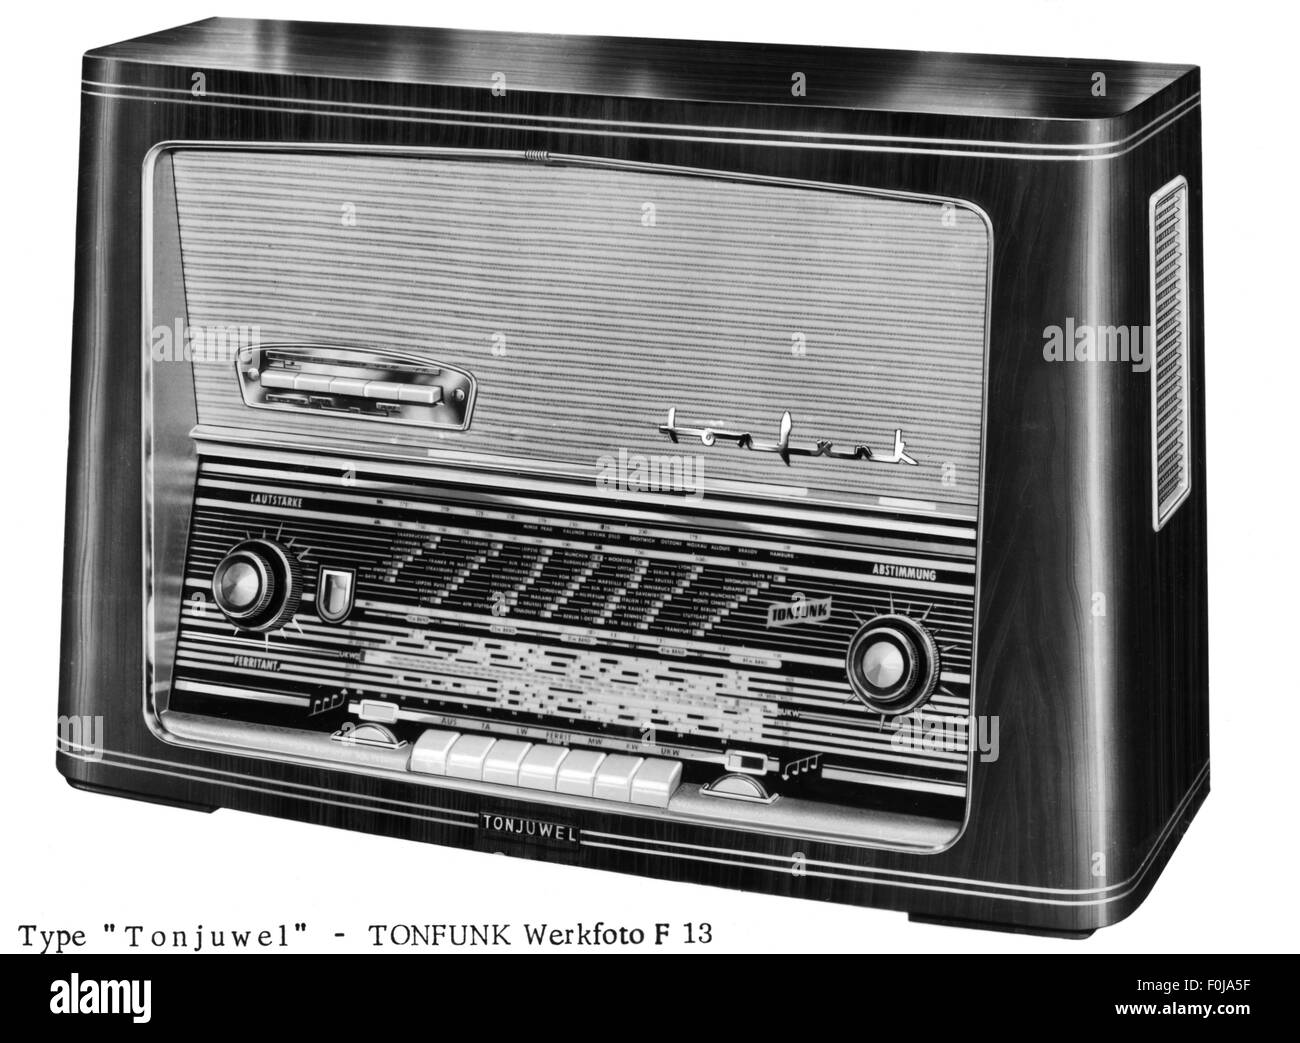 Broadcast, radio, tipo 'Tonjuwel' di Tonfunk, anni '50, Additional-Rights-Clearences-Not available Foto Stock